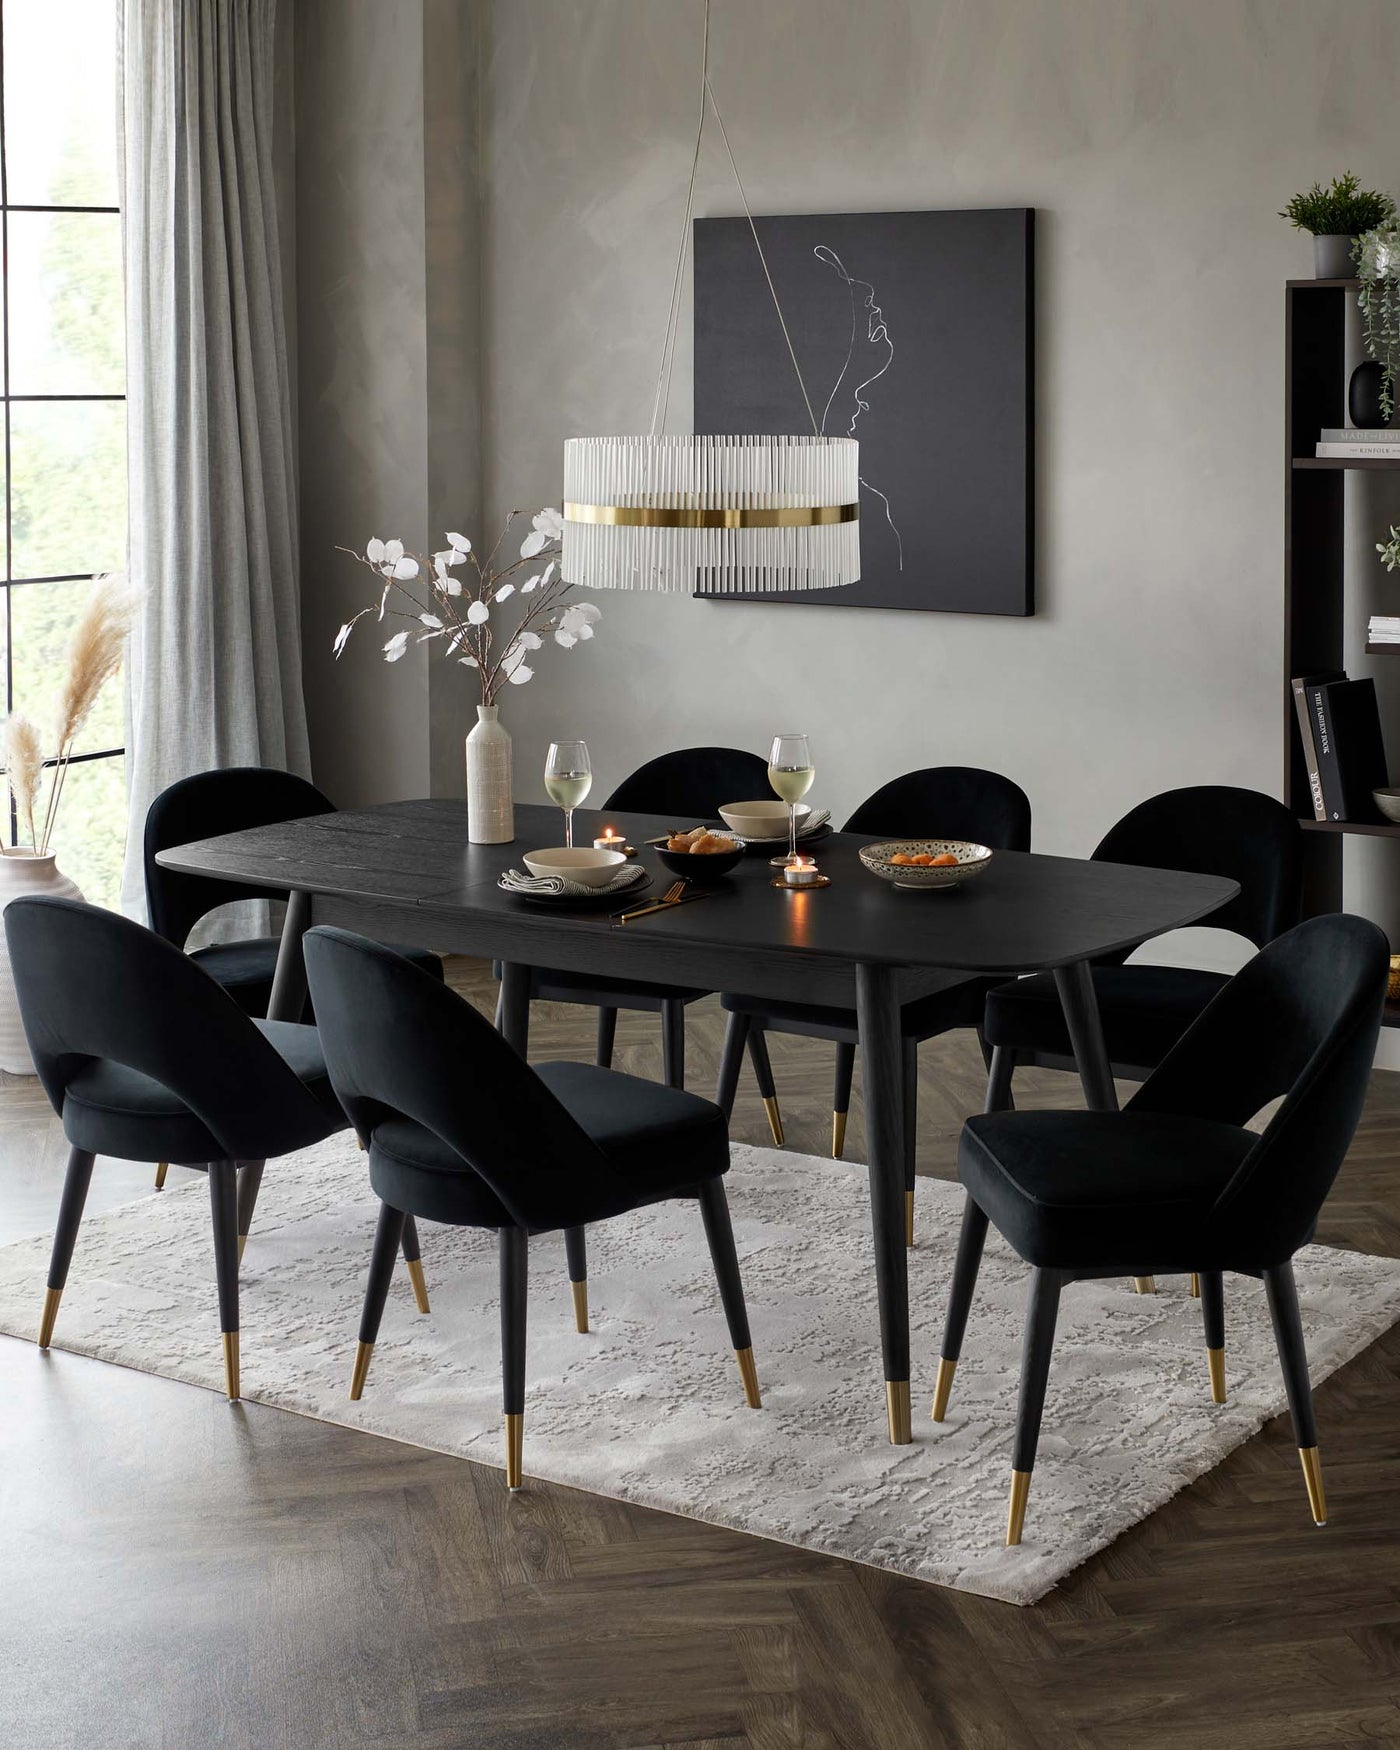 Elegant dining room featuring a modern matte black oval table with a sculptural base and brass detail. Surrounding the table are six plush black velvet chairs with curved backs and brass-tipped legs. The table is set with minimalist dinnerware, glasses, and candles, creating a sophisticated ambiance. The scene is completed by a contemporary hanging pendant light and a plush white area rug beneath the dining set.